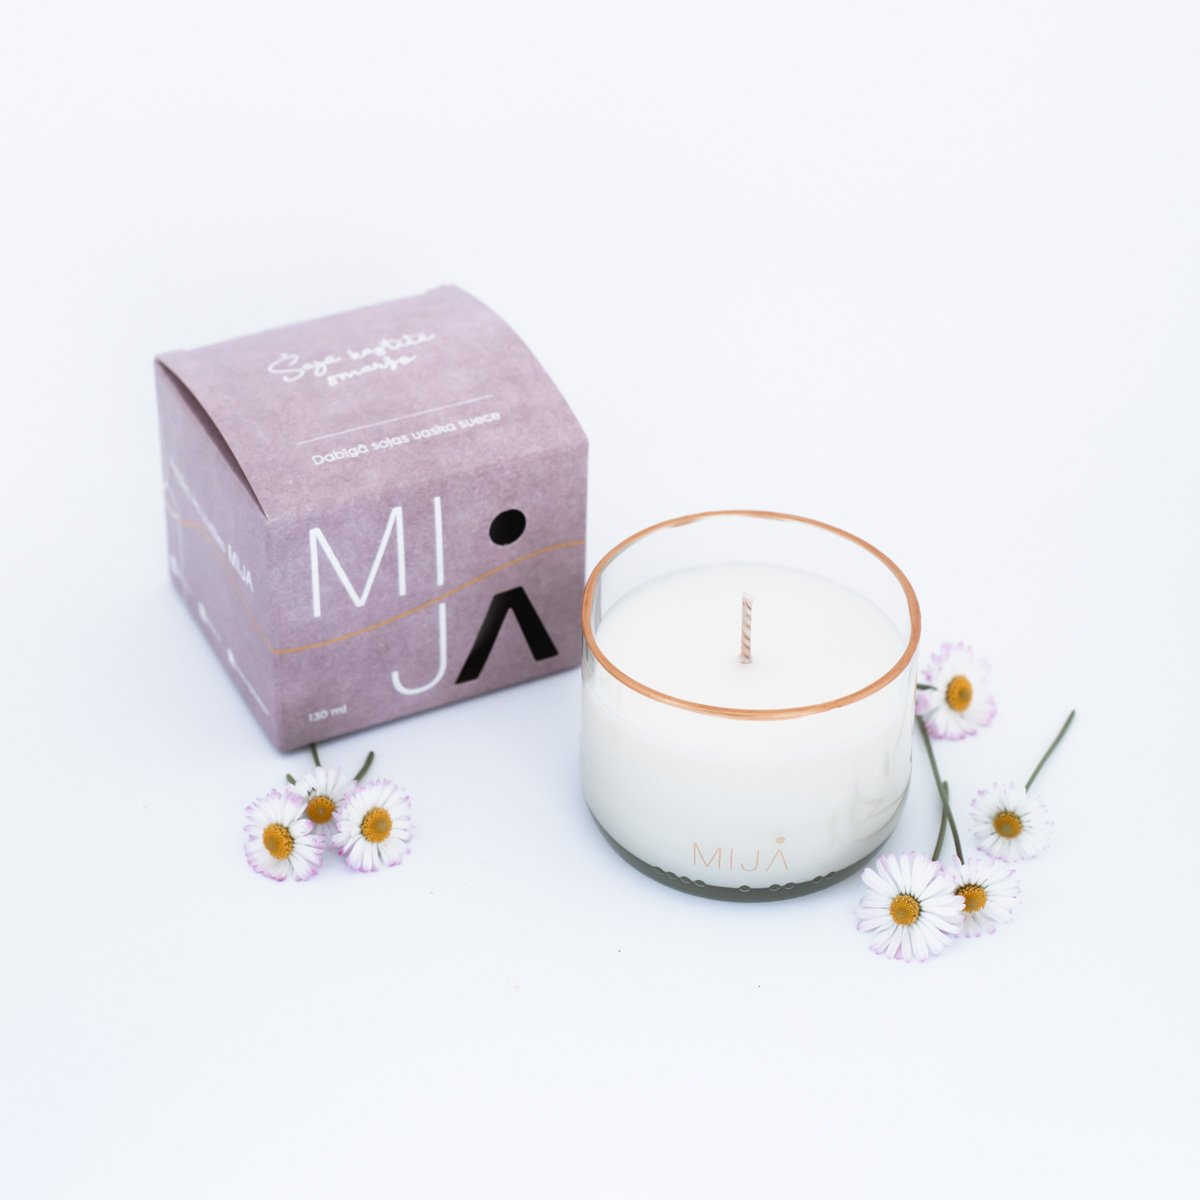 Bicchiere Bougie Grand - La Soufflerie - Hand poured natural wax candle